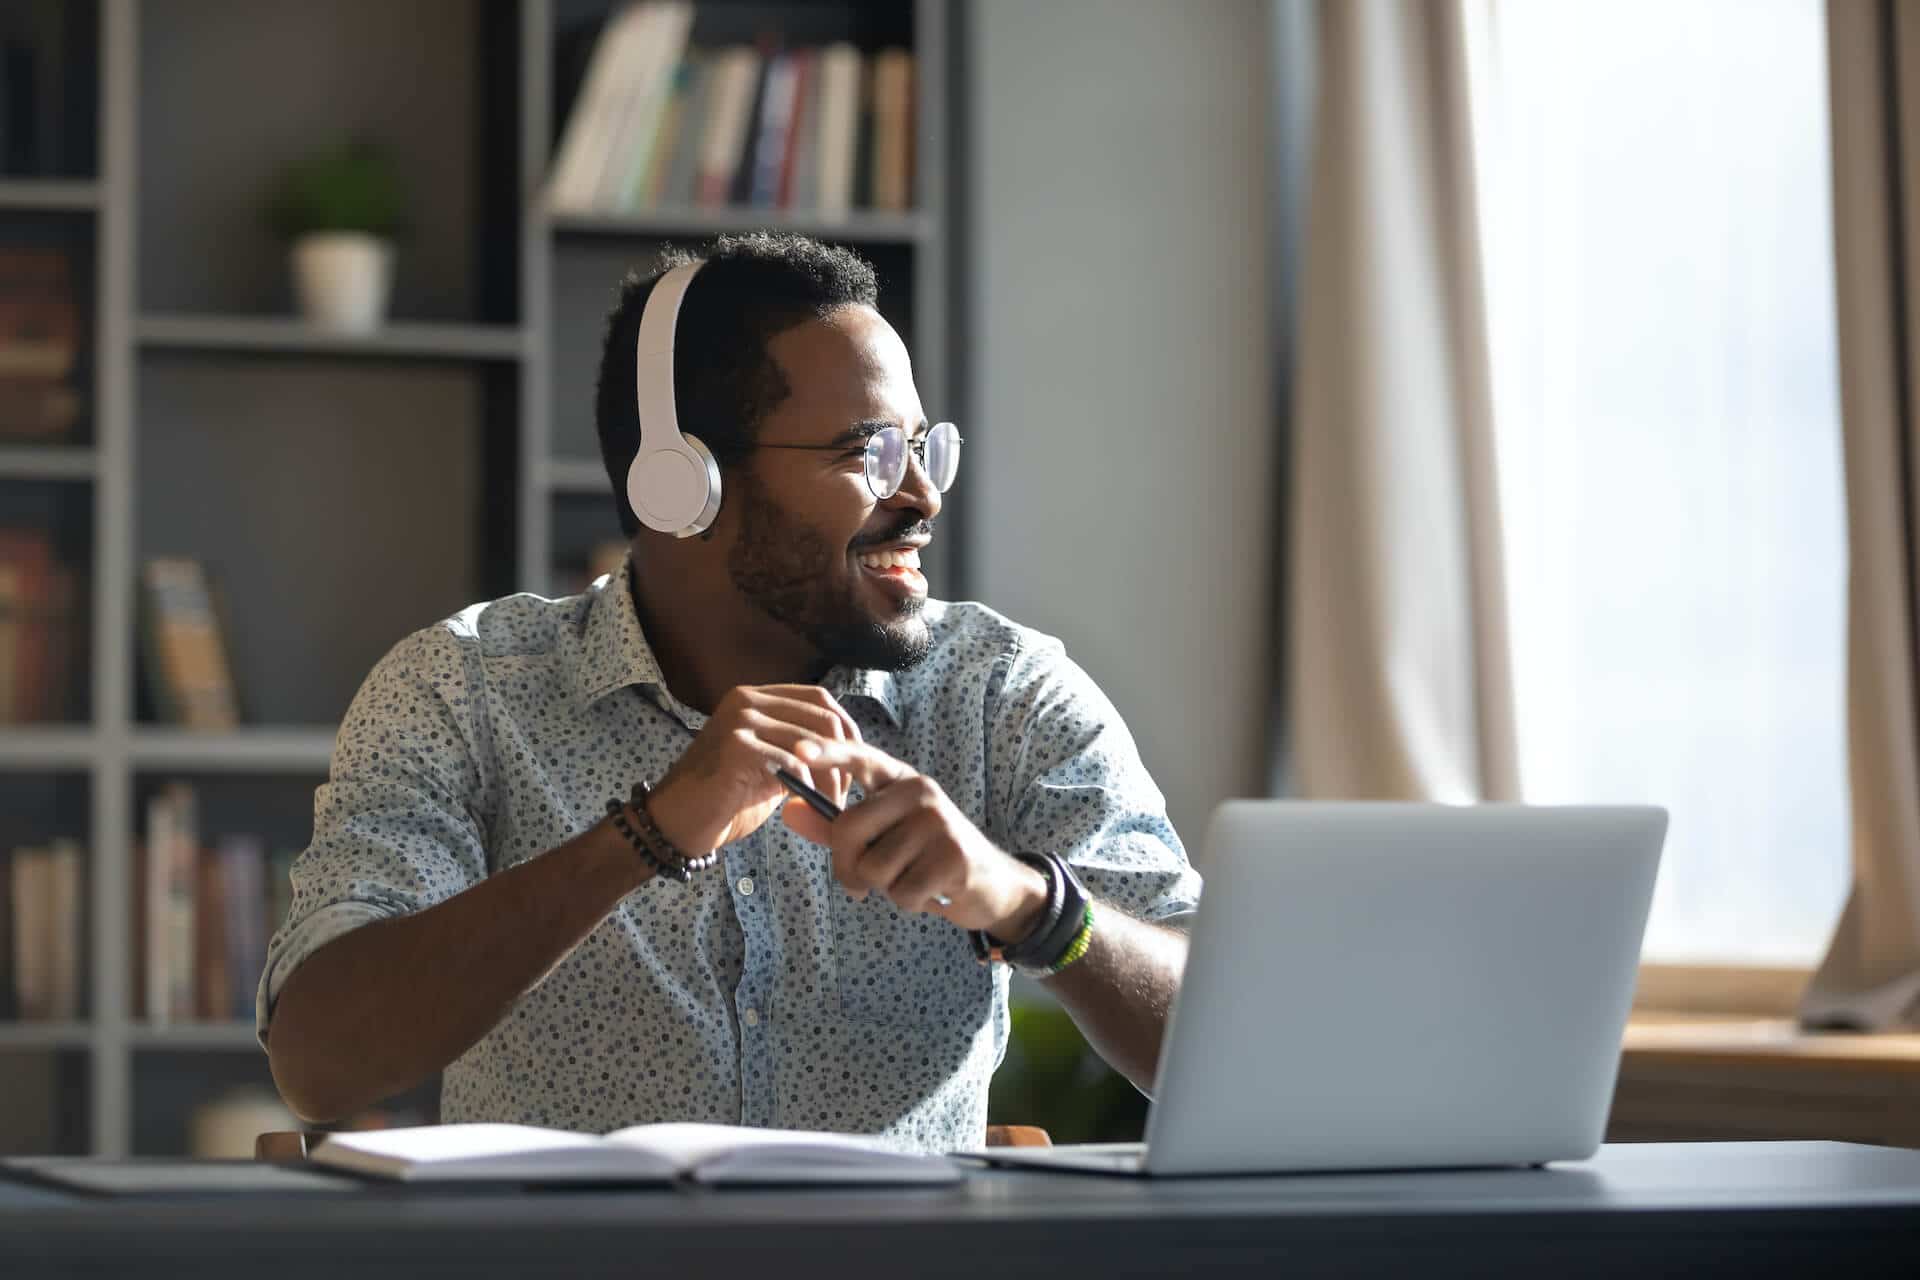 Smiling man with headphones working on laptop